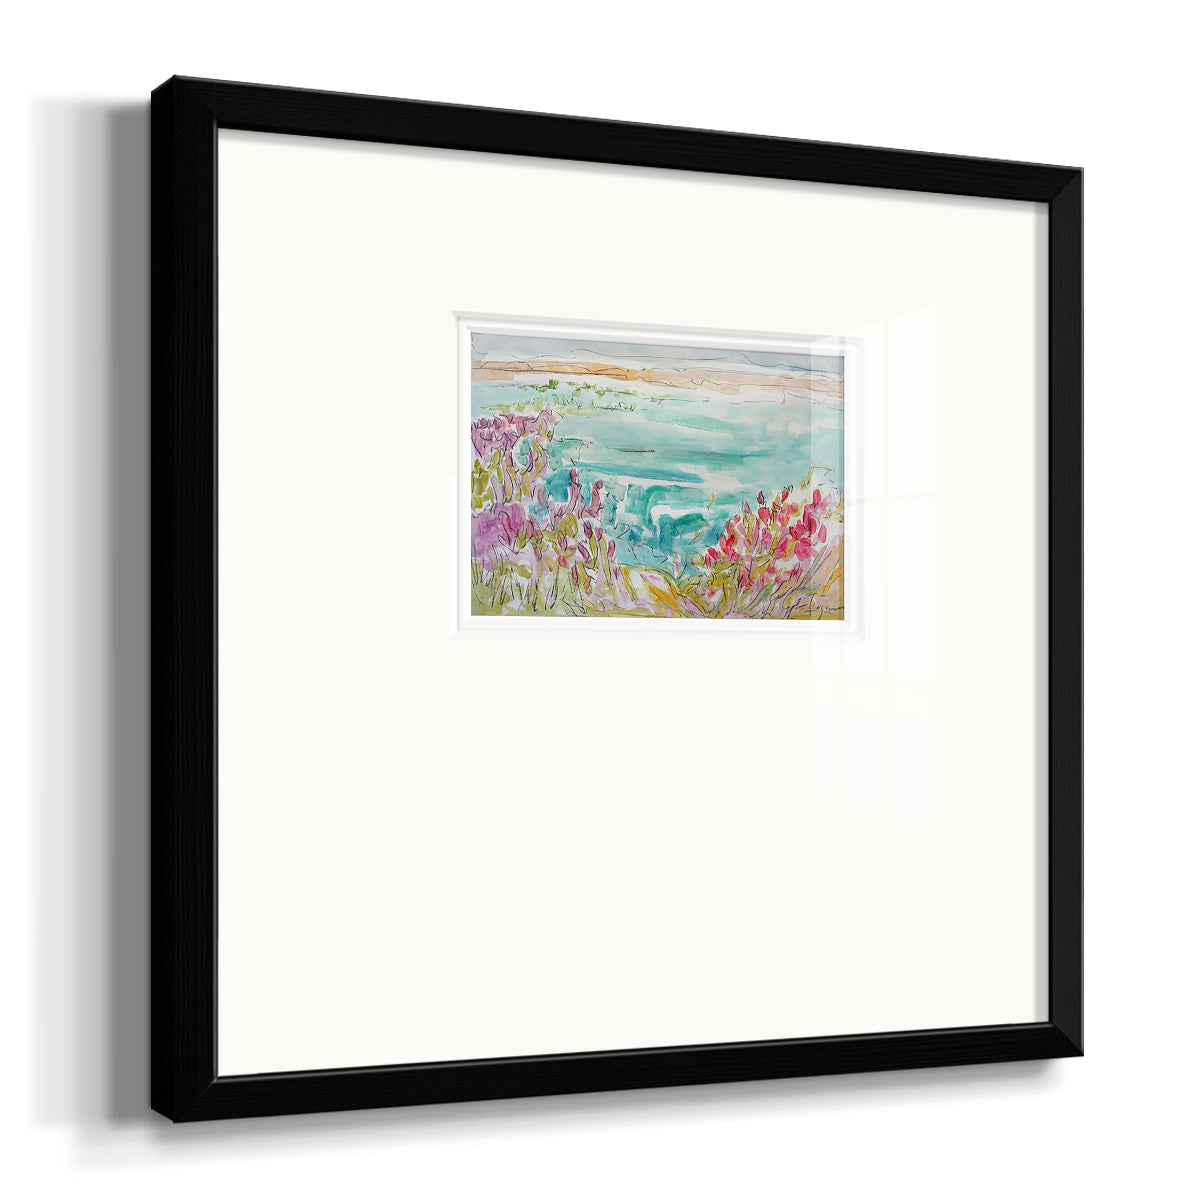 On a Whim, Fly Premium Framed Print Double Matboard